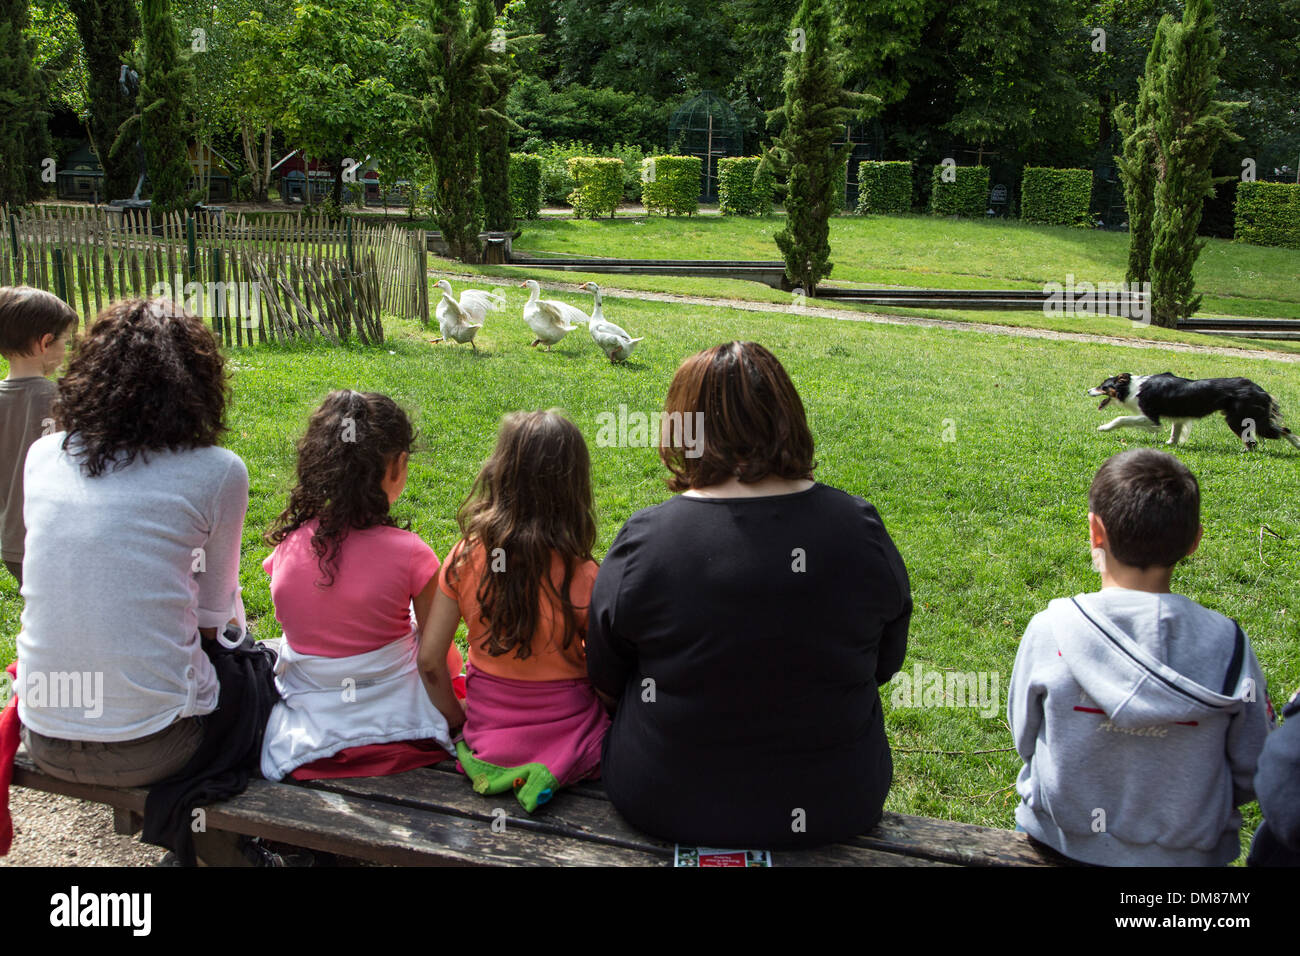 DEMONSTRATION OF A SHEPHERD DOG WITH THE FARMYARD GEESE, FAMILY VISITING THE FARMYARD MUSEUM AT THE POTAGER DES PRINCES, CHANTILLY, OISE (60), FRANCE Stock Photo